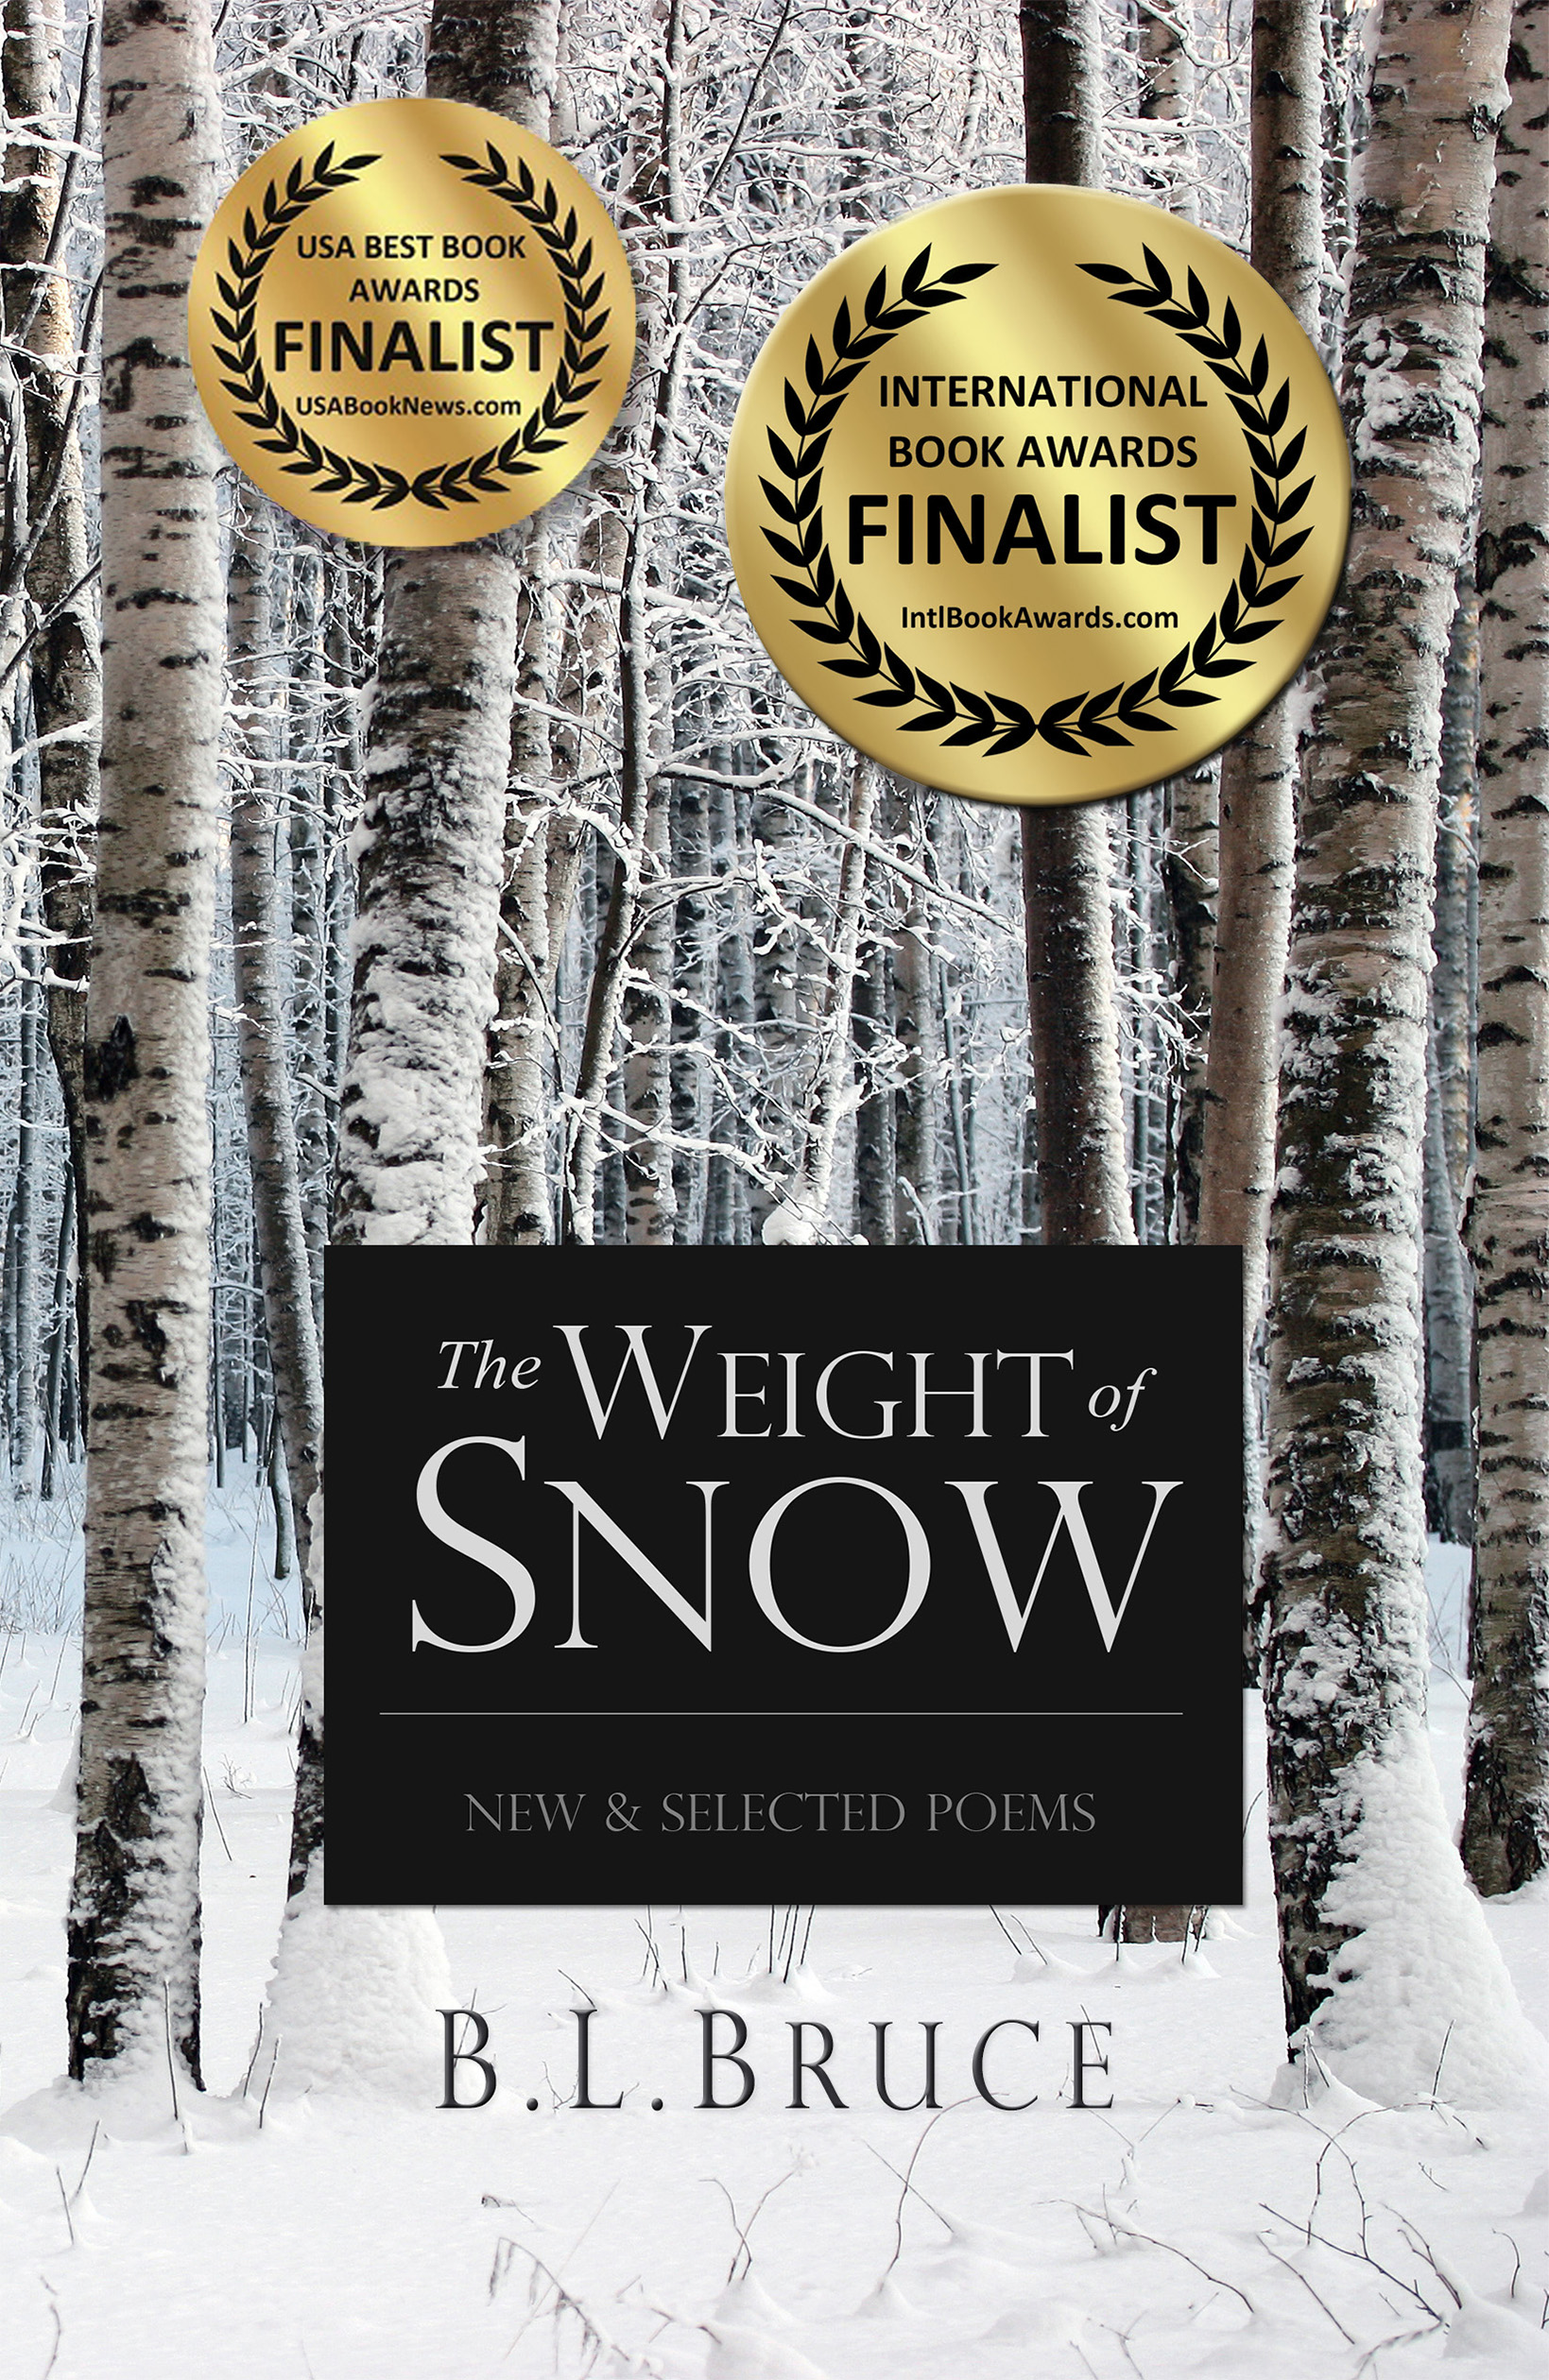 The Weight of Snow: New & Selected Poems